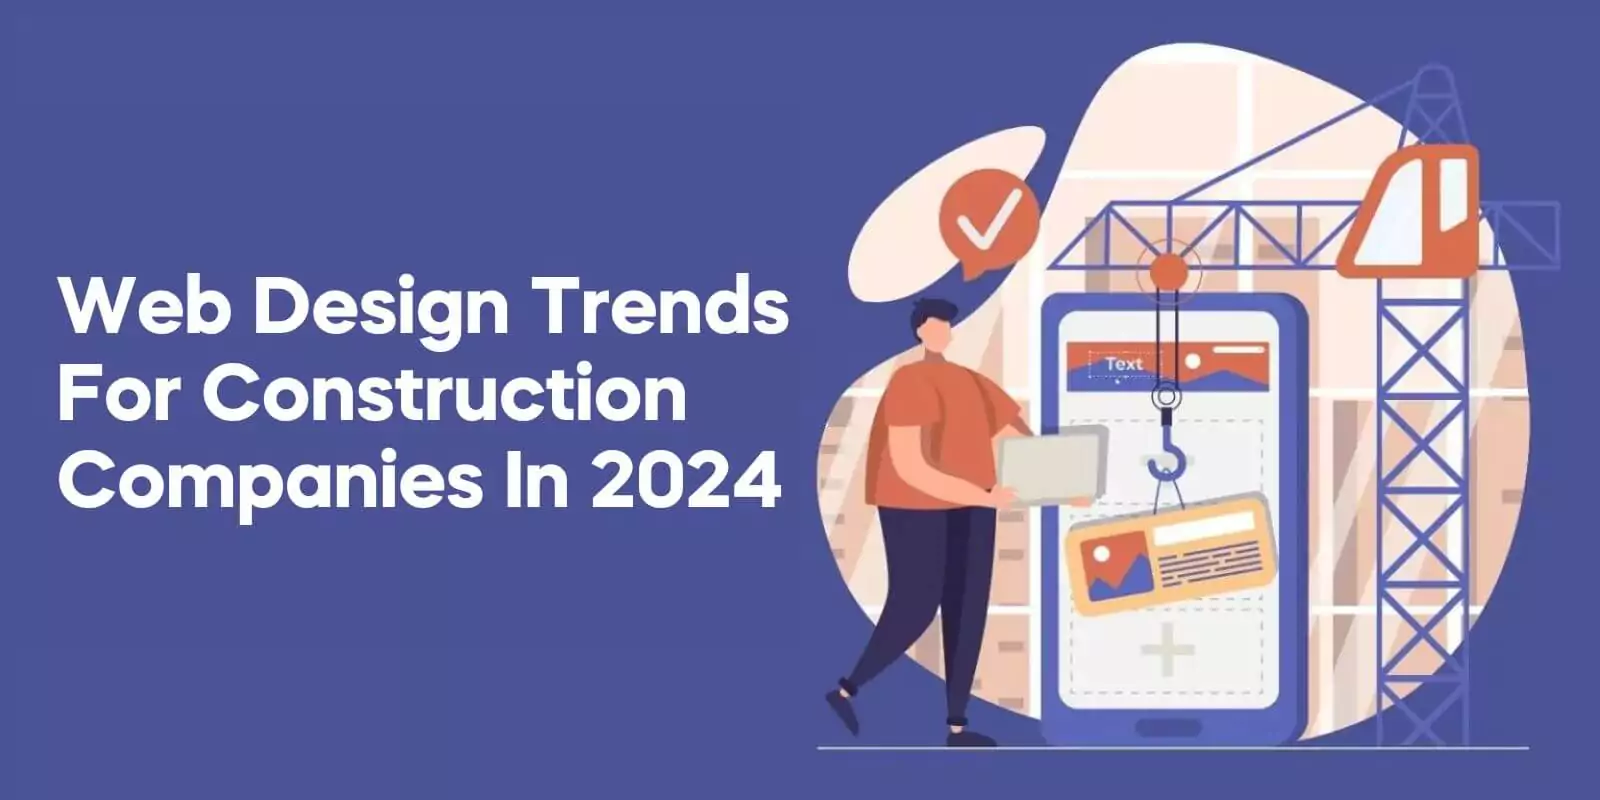 Web Design Trends for Construction Companies in 2024